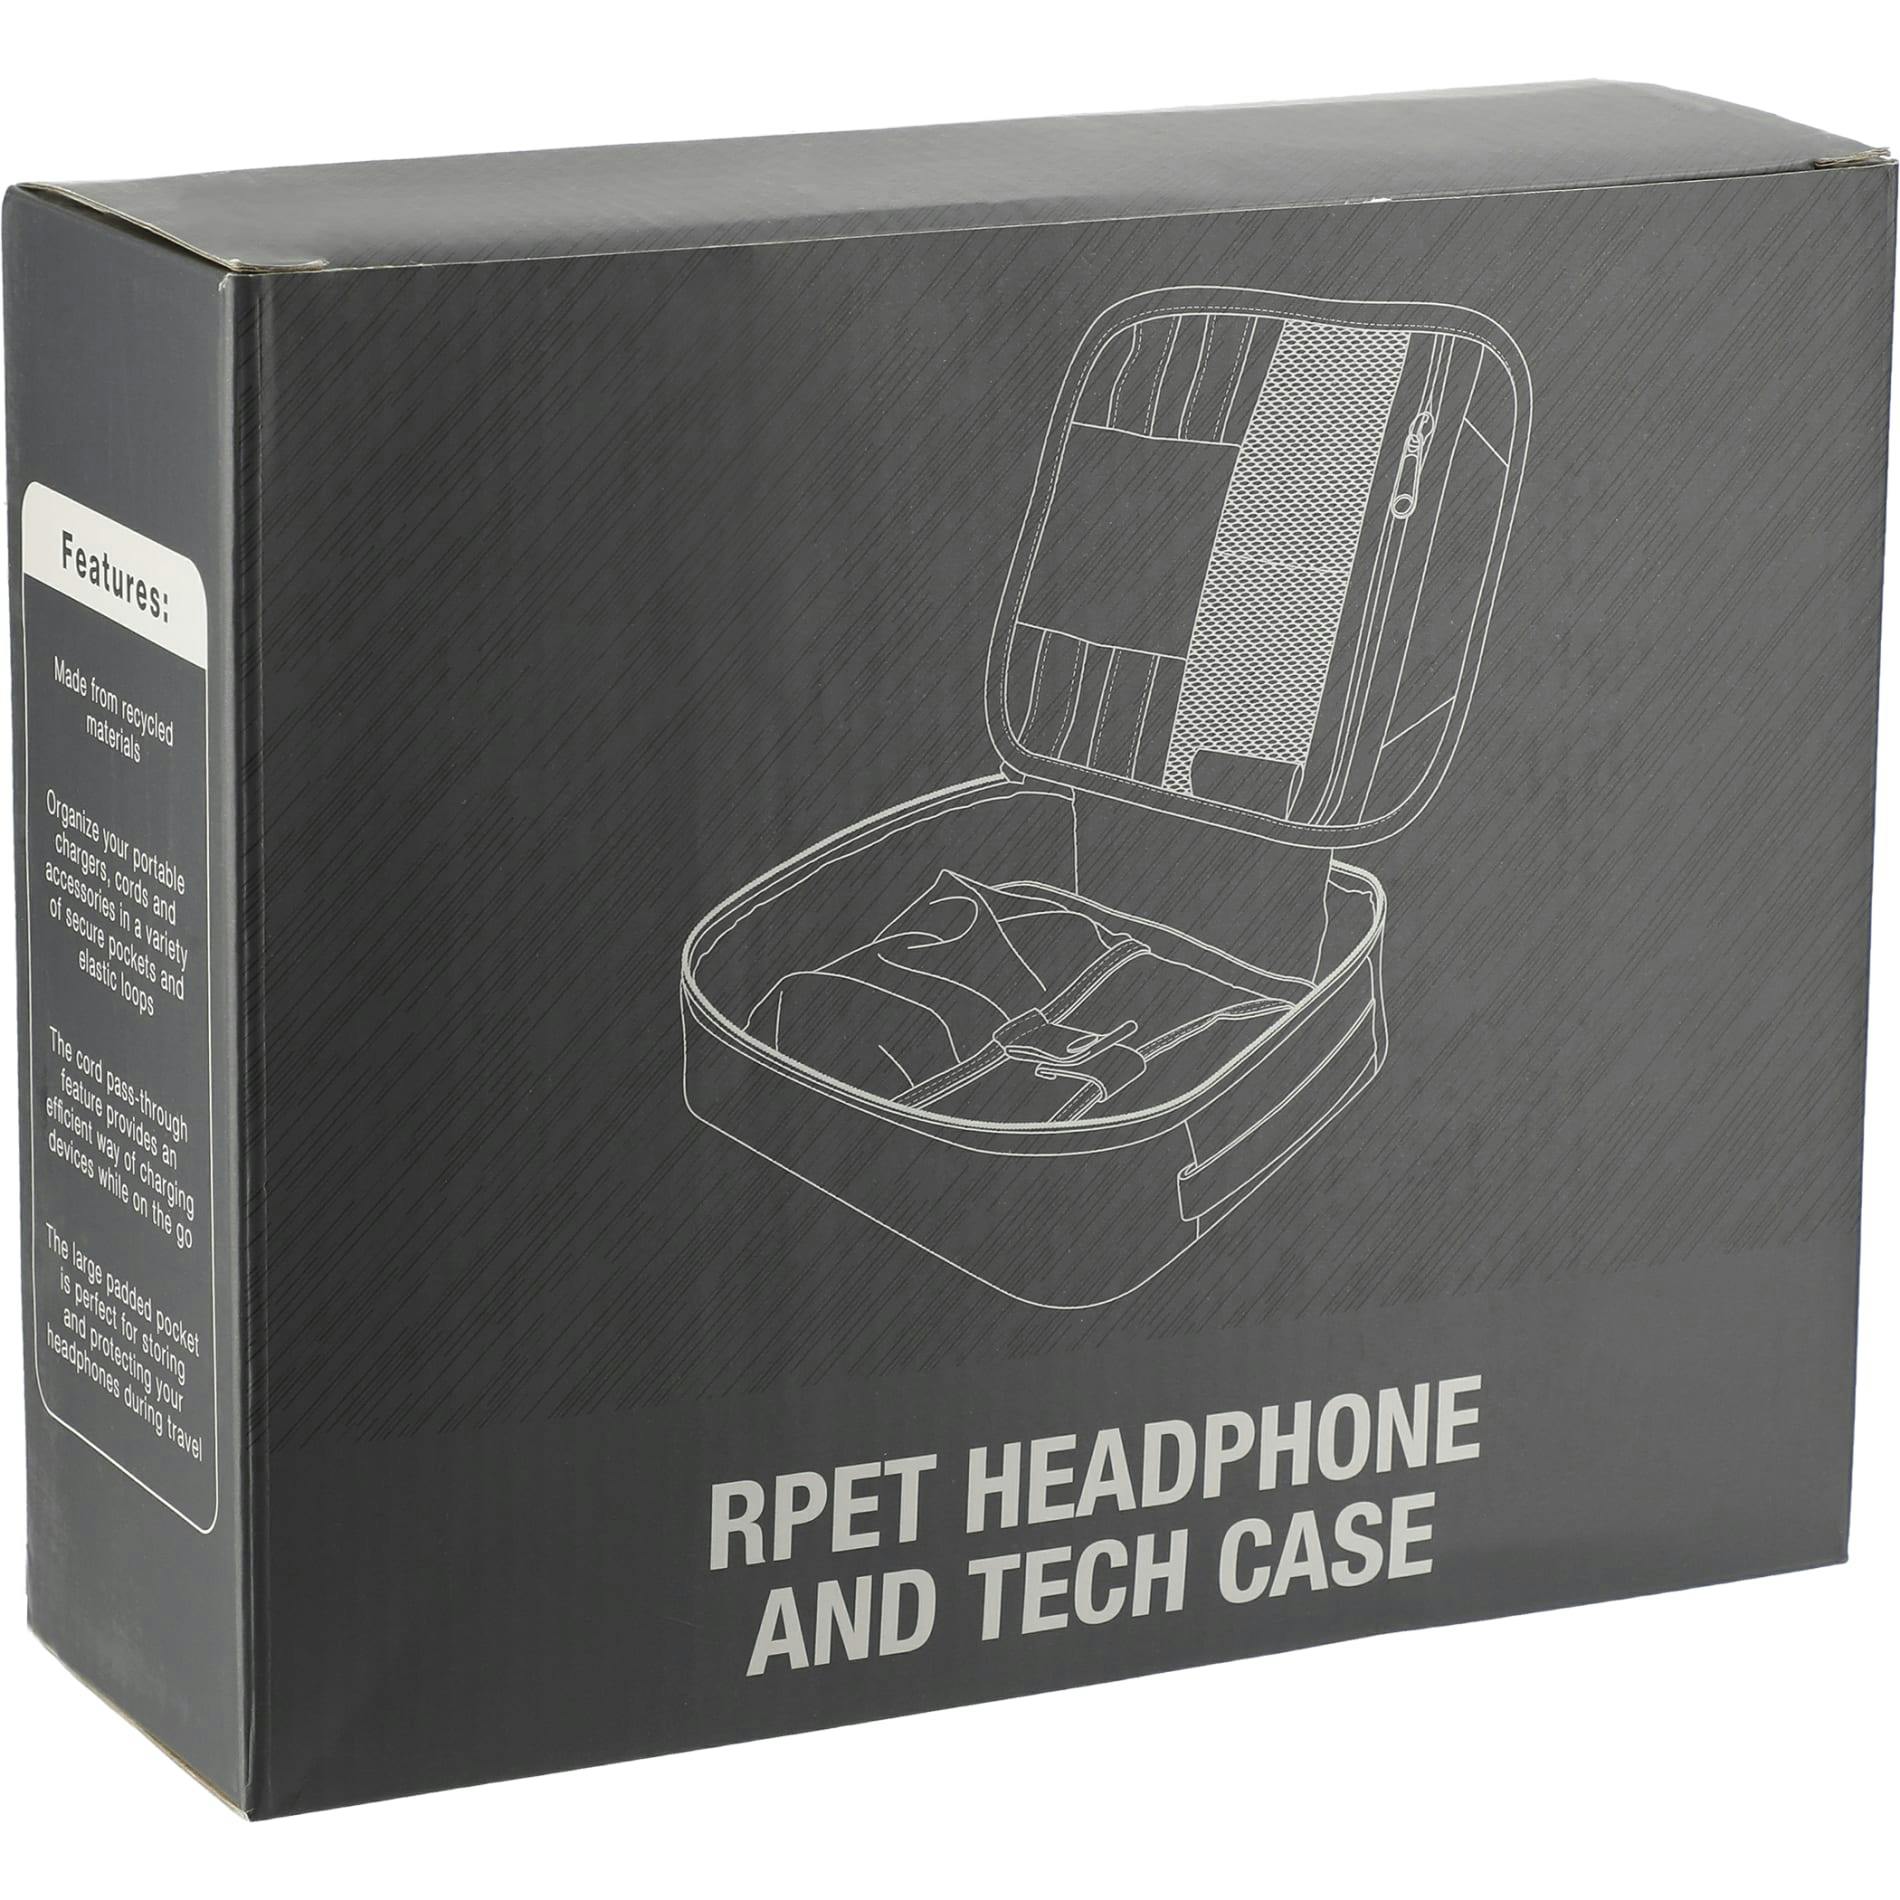 RPET Headphone and Tech Case - additional Image 4